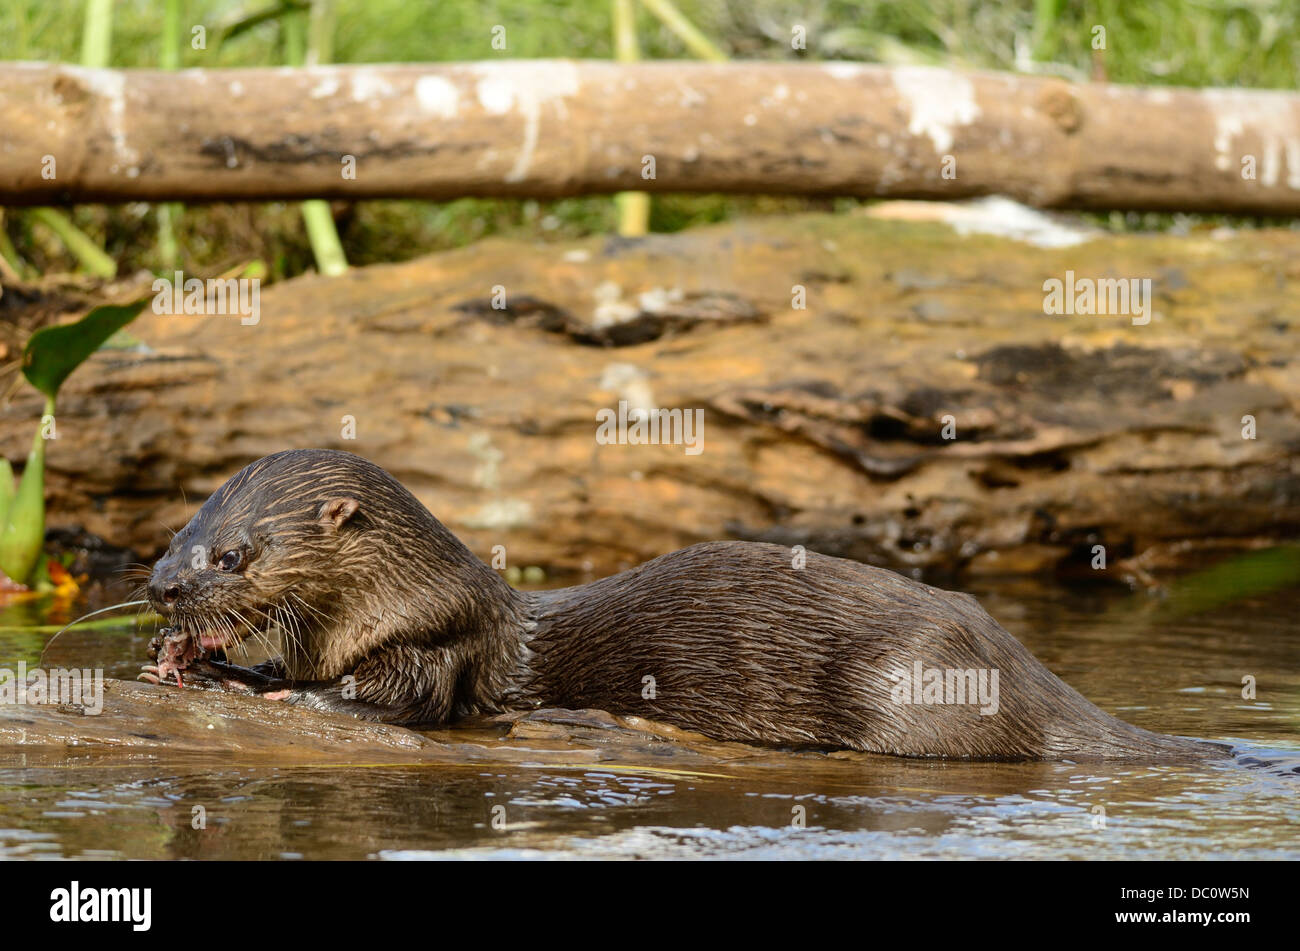 Neotropical river otter eating fish Stock Photo